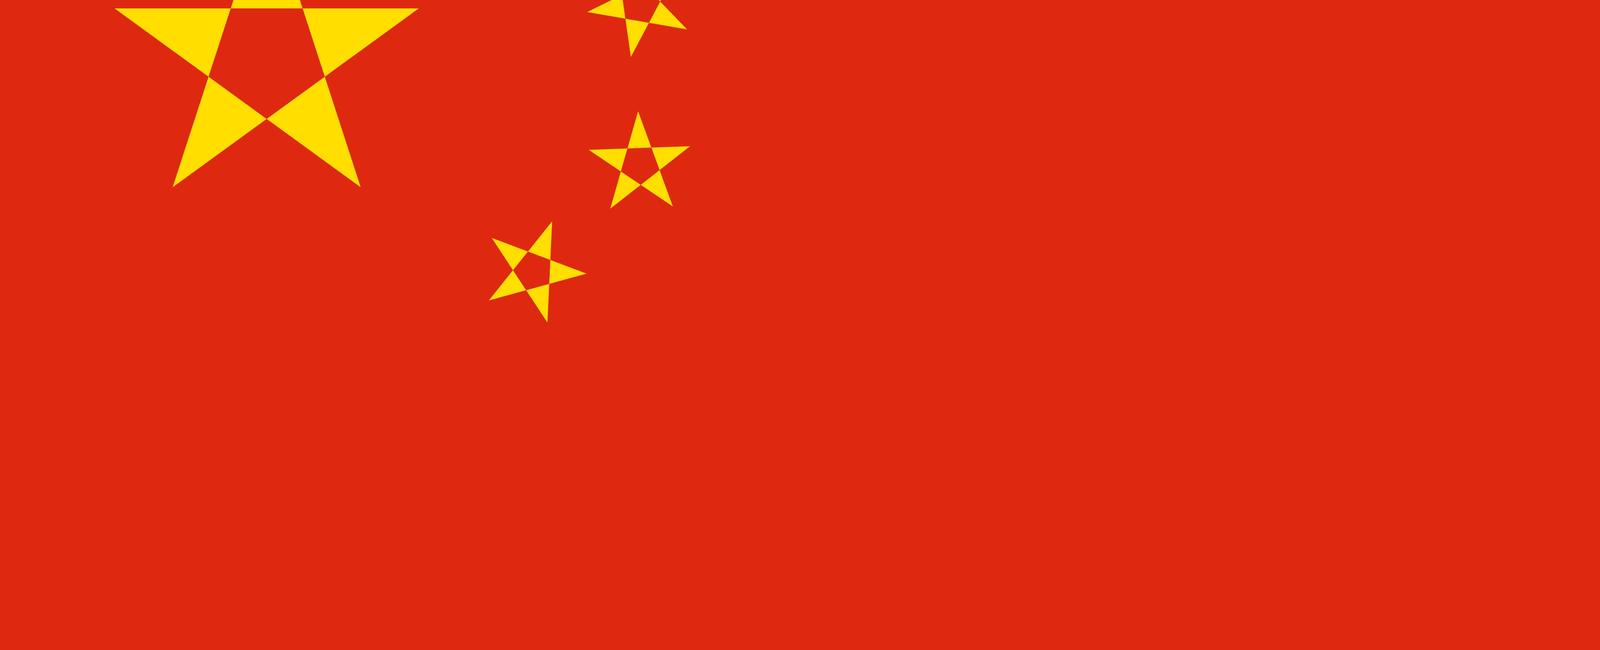 What is the main color on the chinese flag red